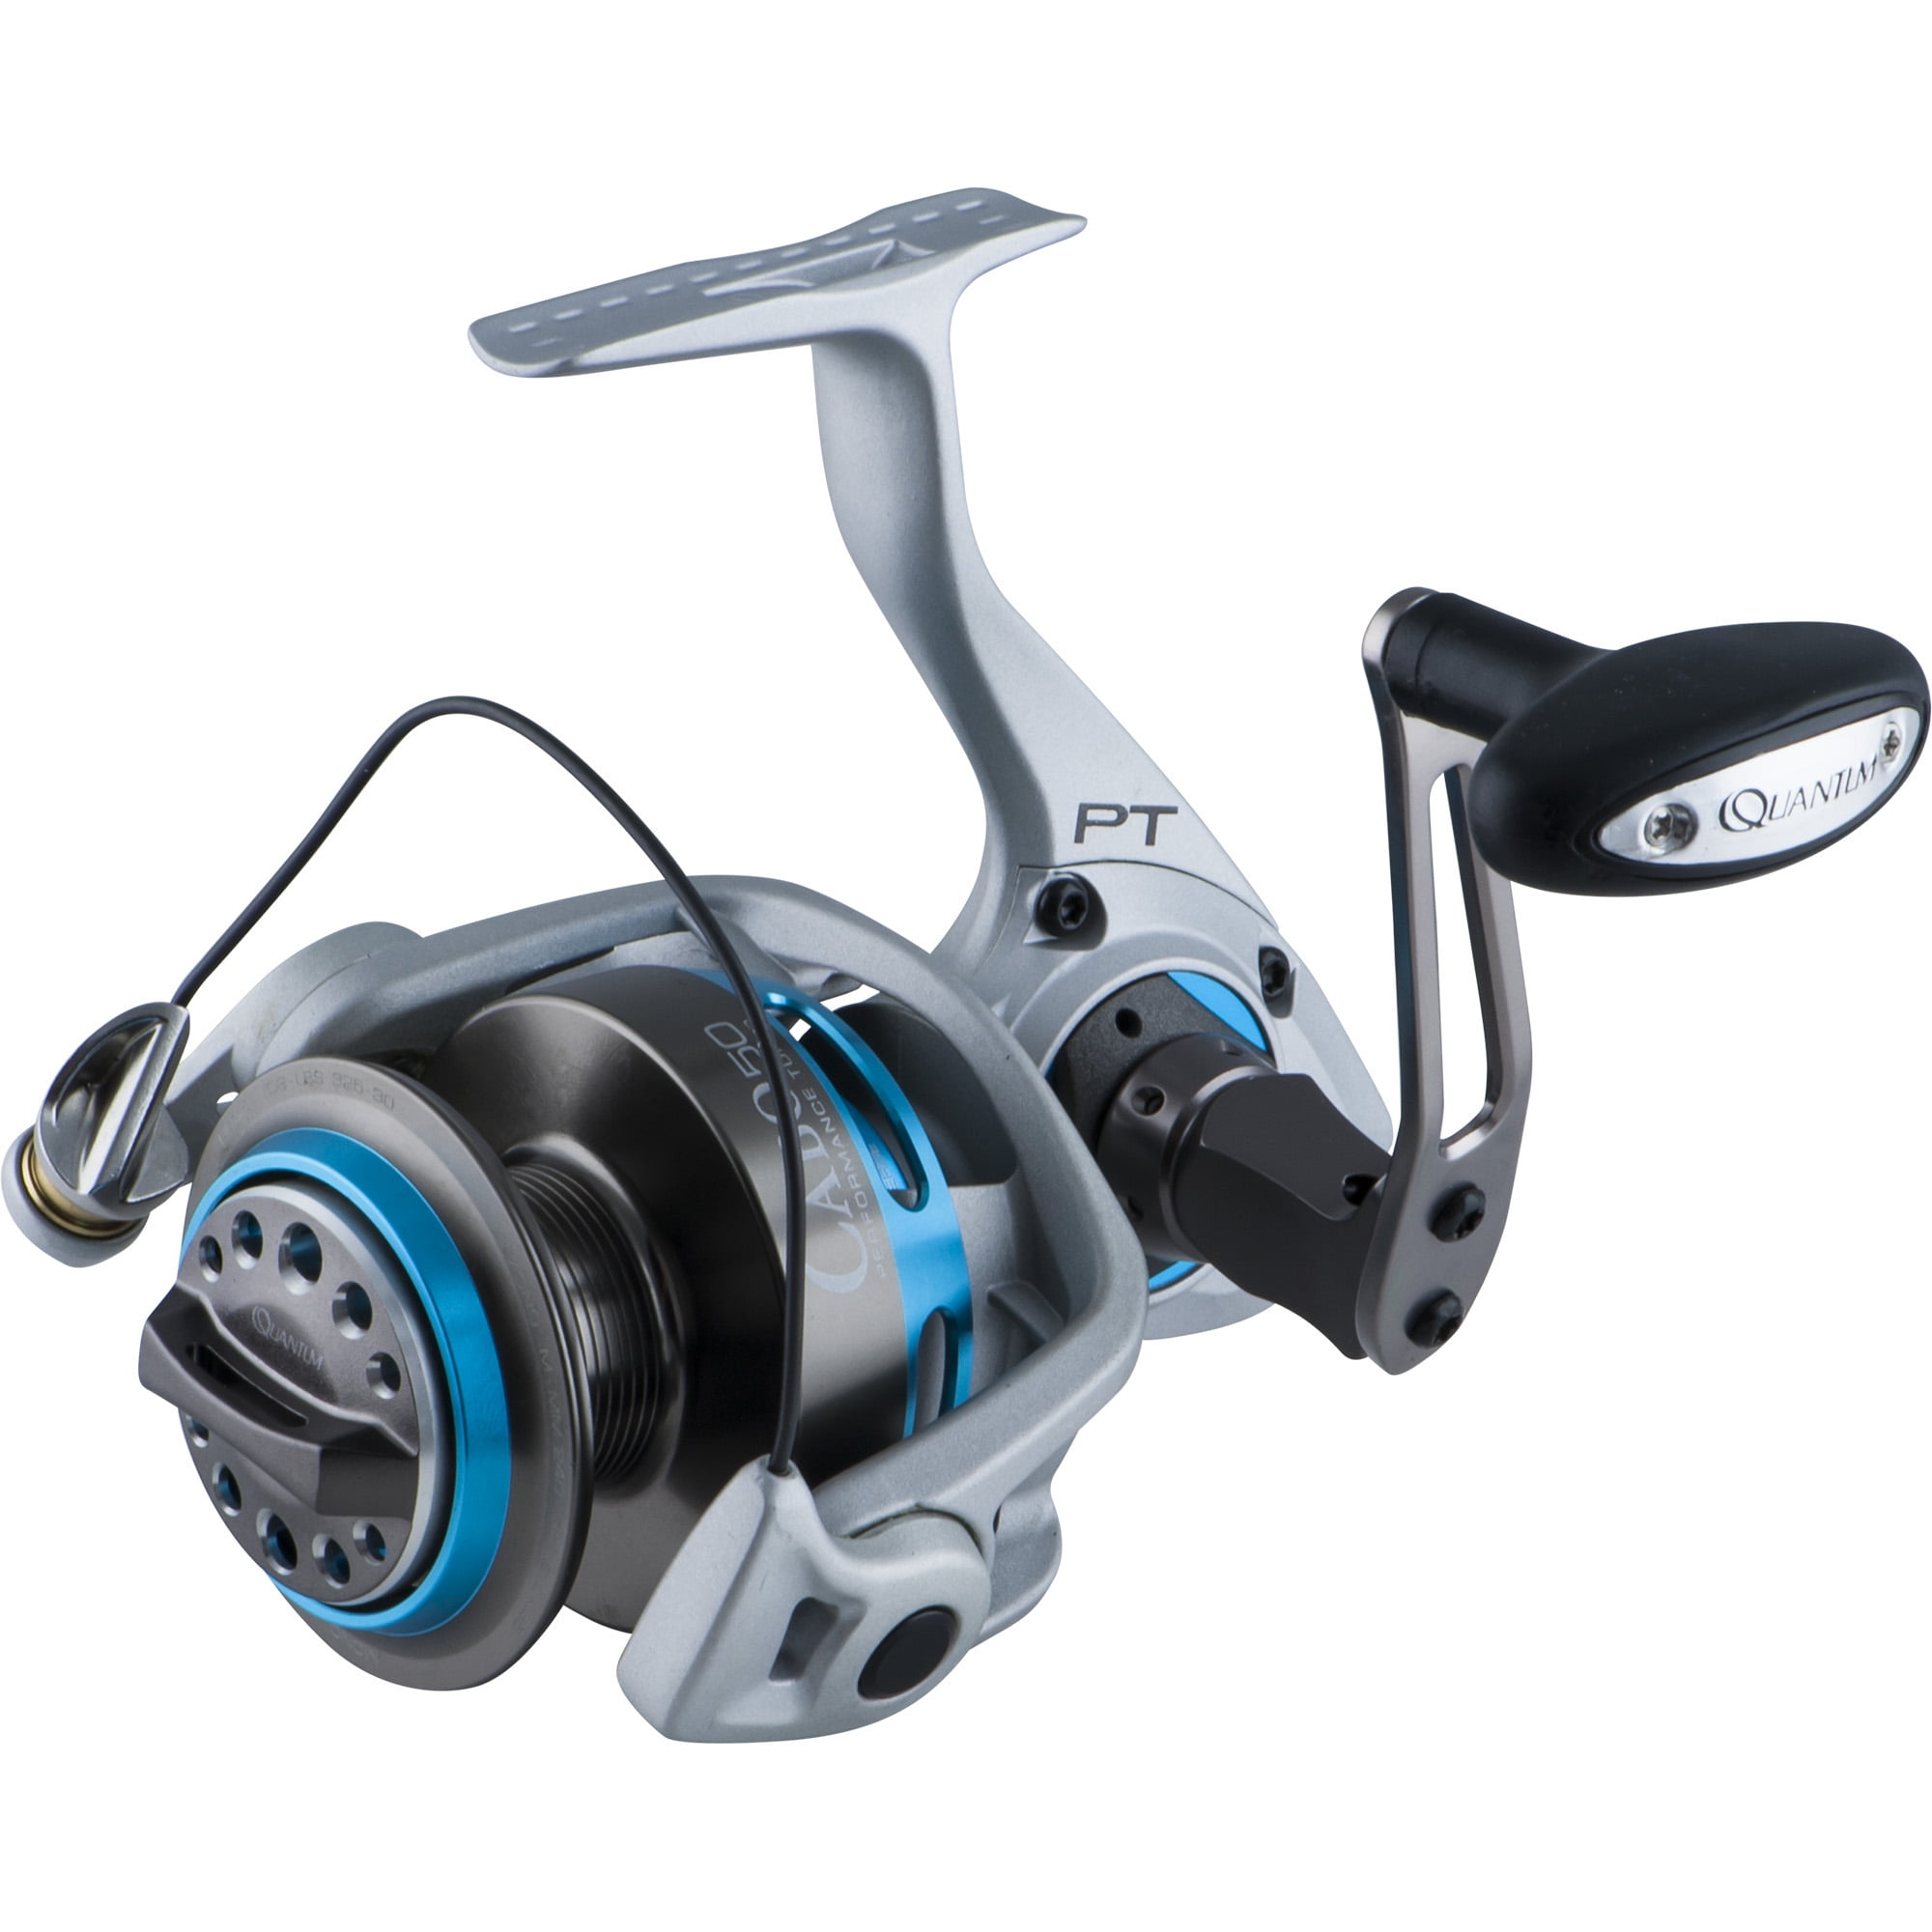 Quantum Cabo Saltwater Spinning Fishing Reel, Size 60 Reel, Silver/Blue